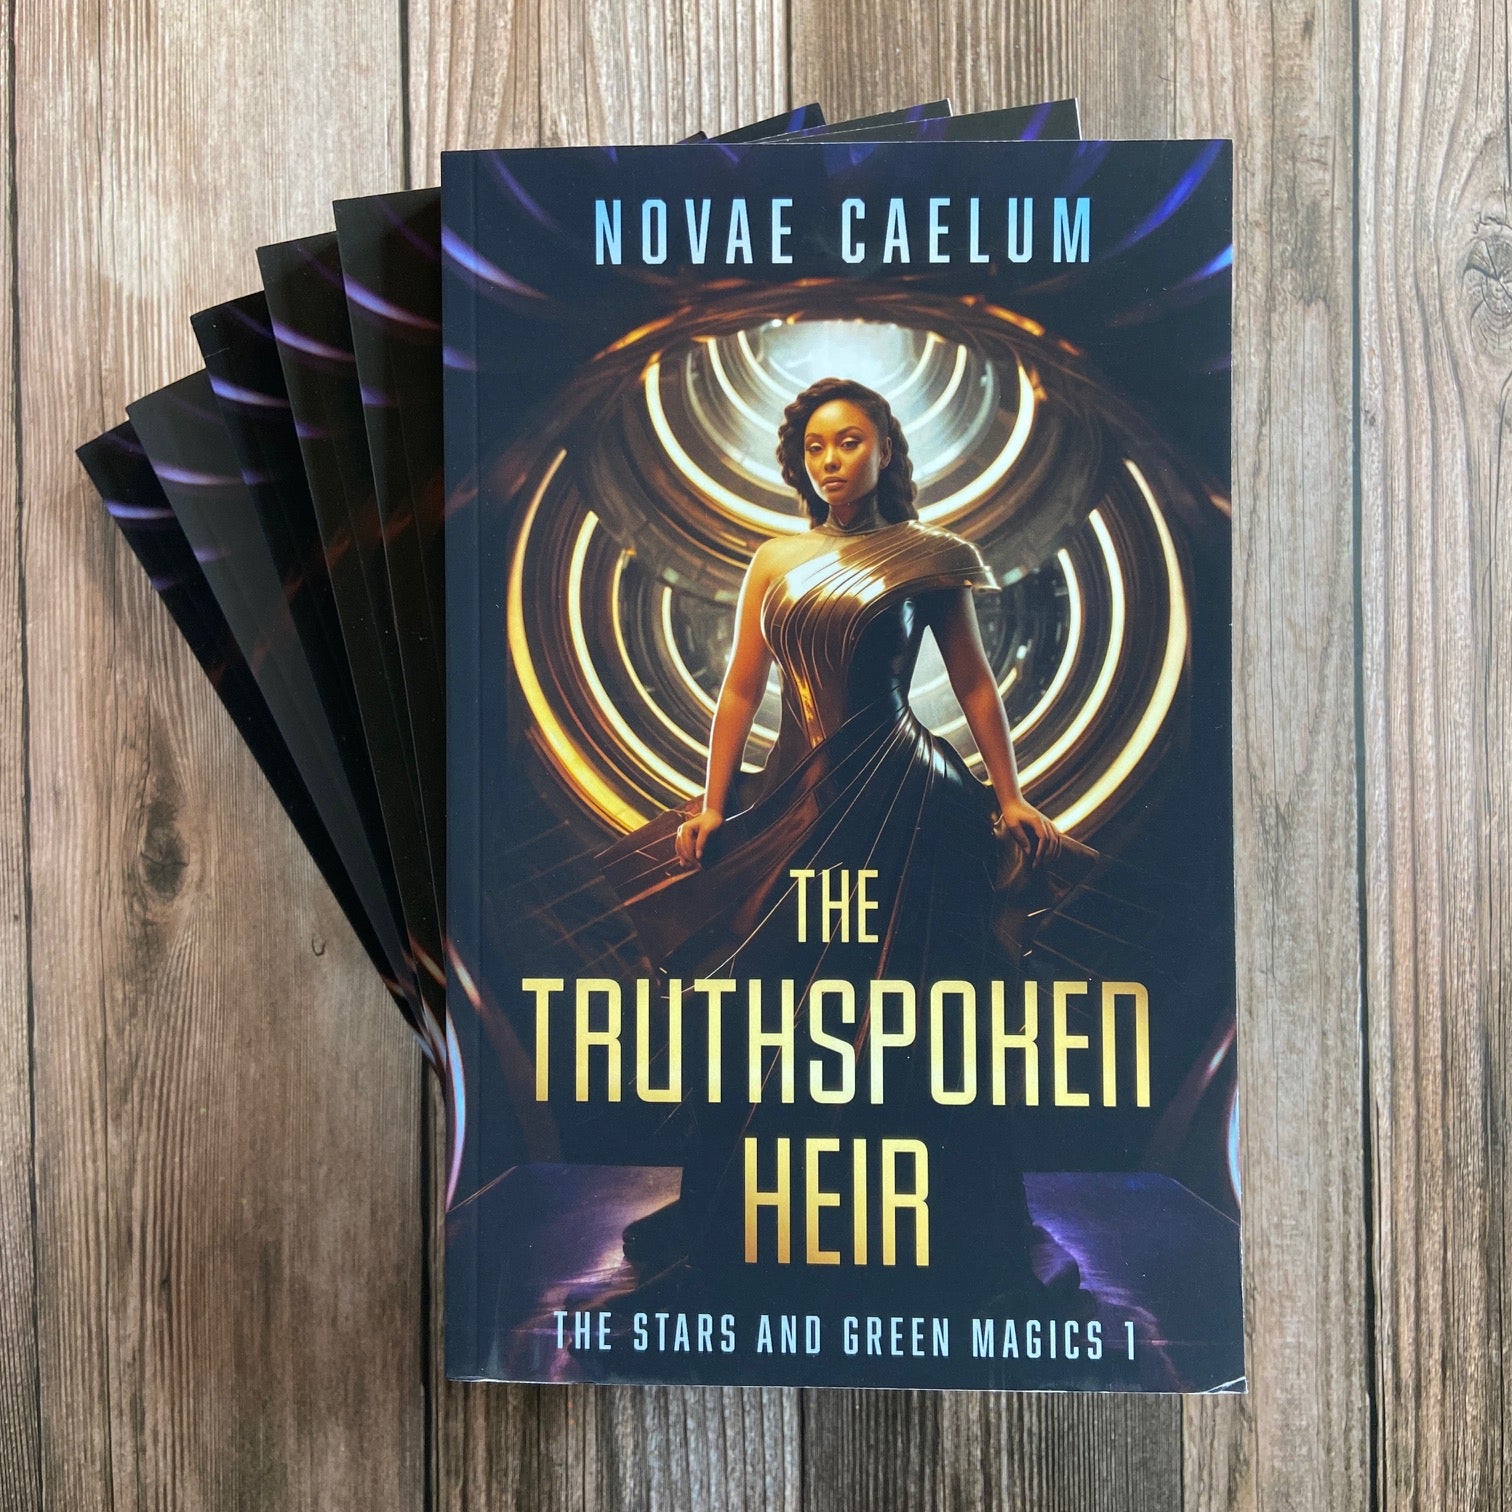 A stack of Novae Caelum books titled "SCRATCH AND DENT - SIGNED The Truthspoken Heir: The Stars and Green Magics Book 1" featuring a cover image of a woman with shapeshifting powers, standing with glowing rings in the background.